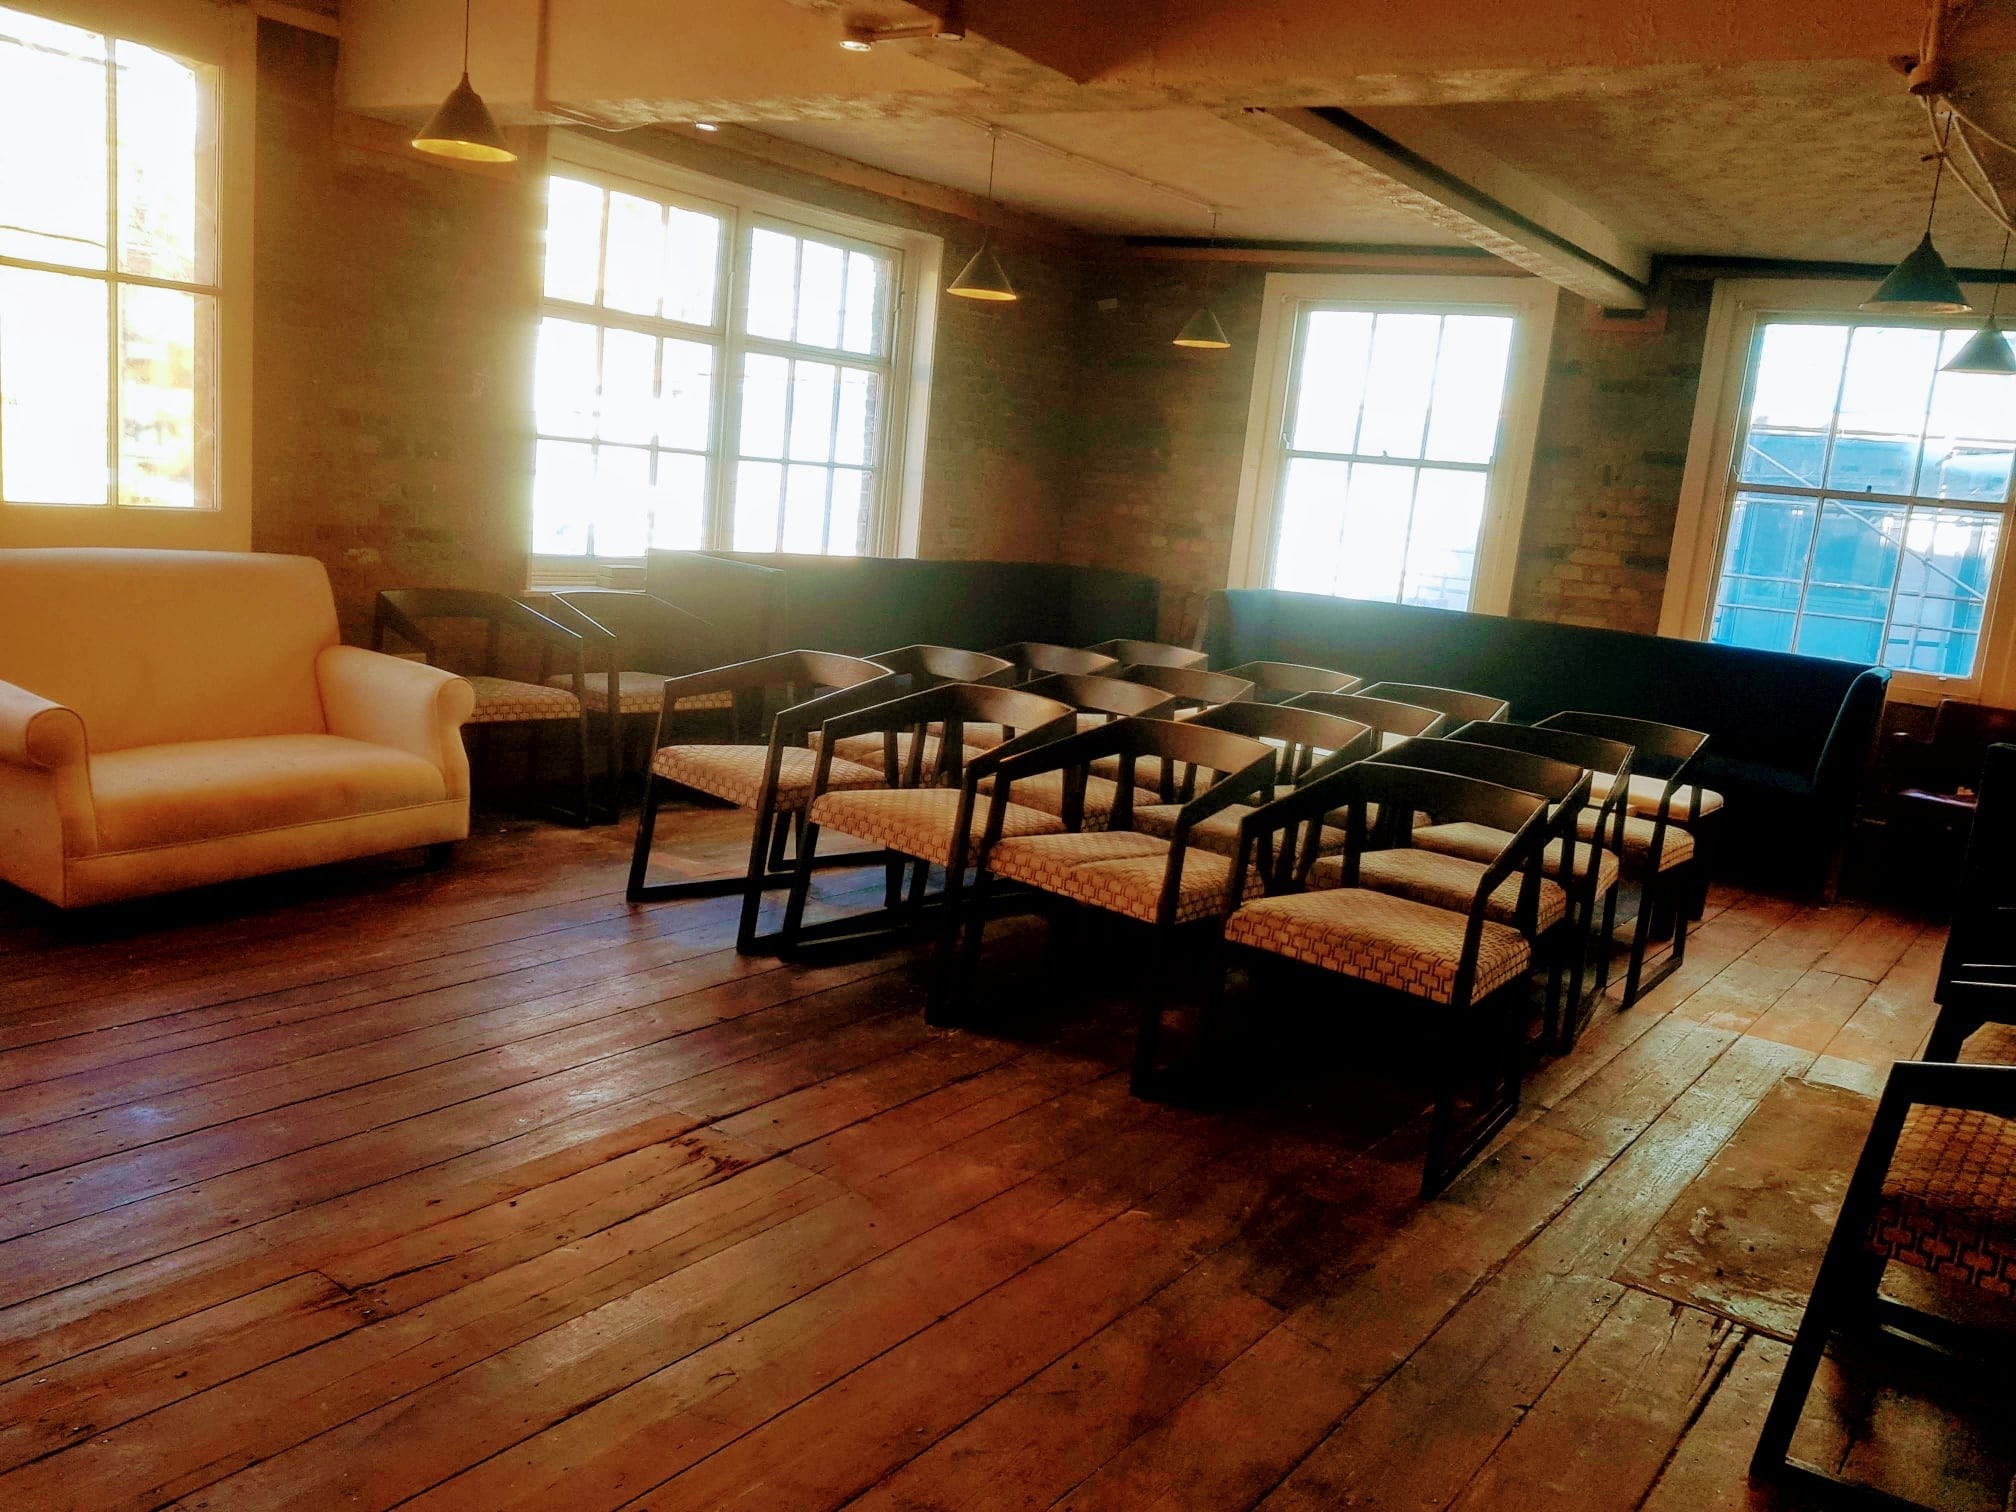 large room with comfortable chairs and sofas, barebrick walls and wooden floors,lots of light thro several windows